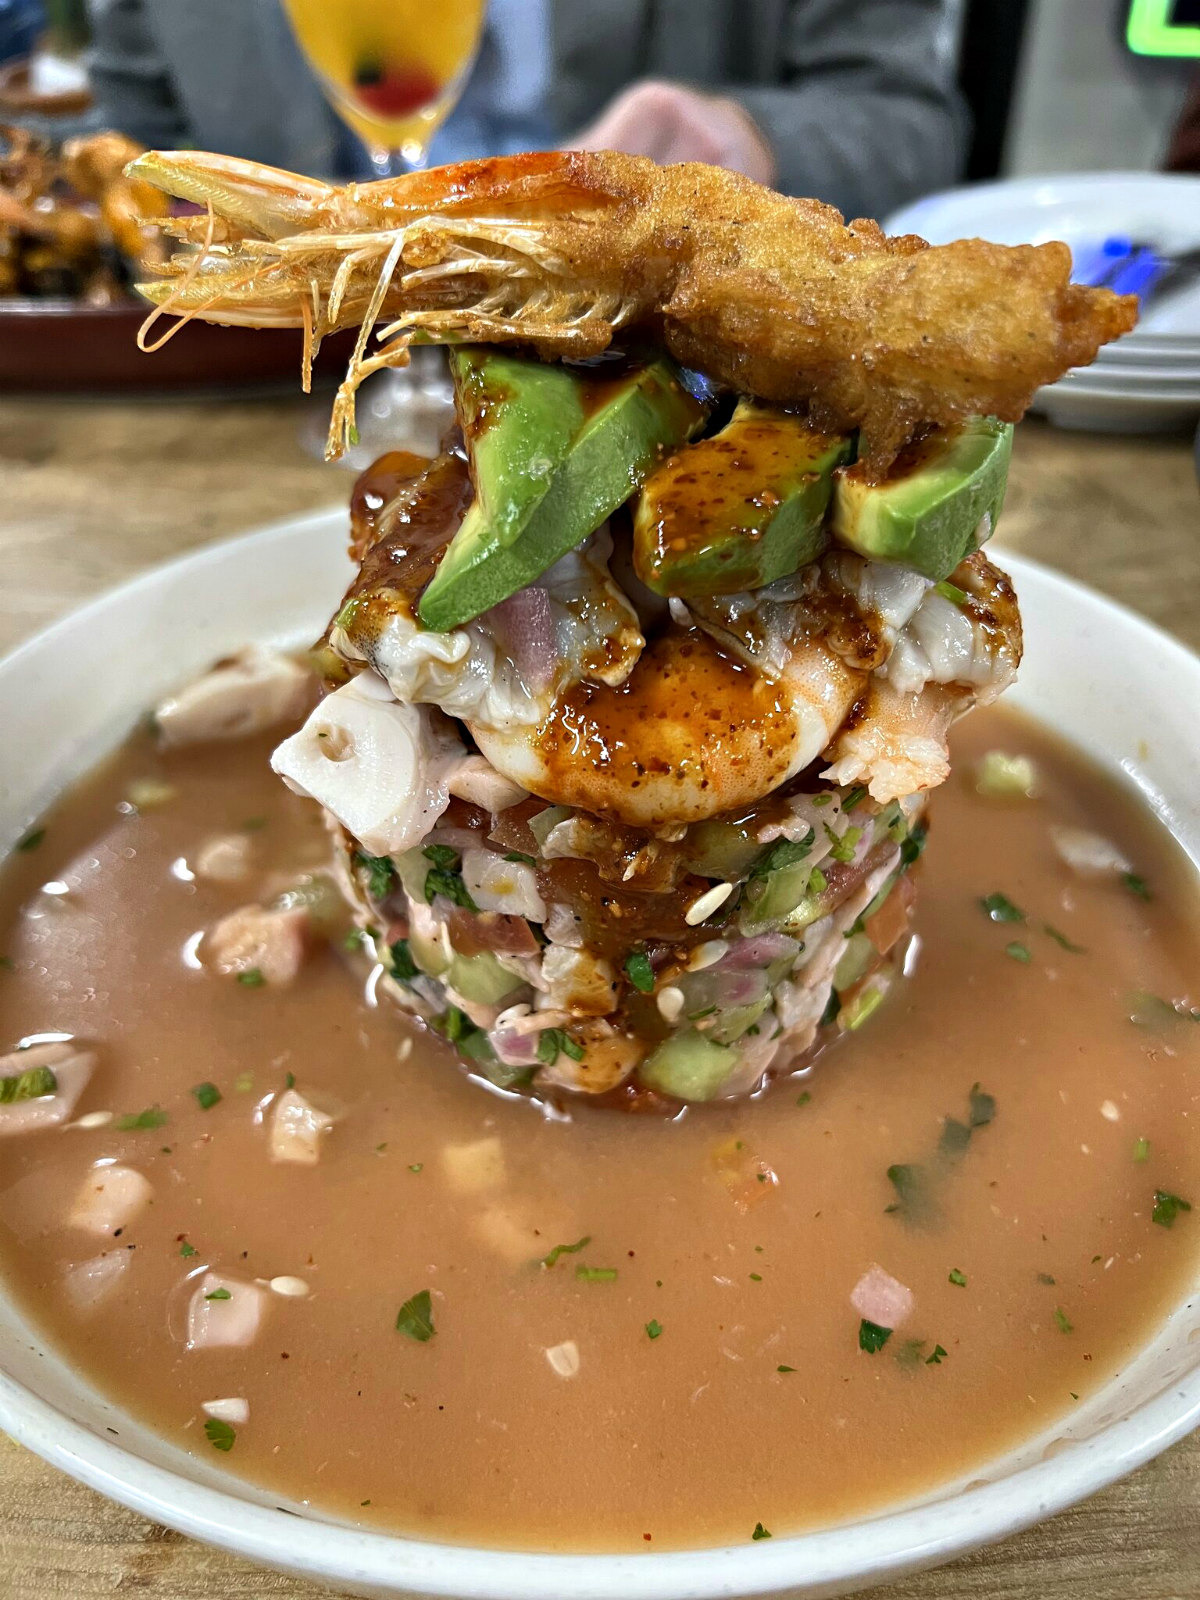 Review: At Isla del Mar, fun seafood comes with pops of bright flavor